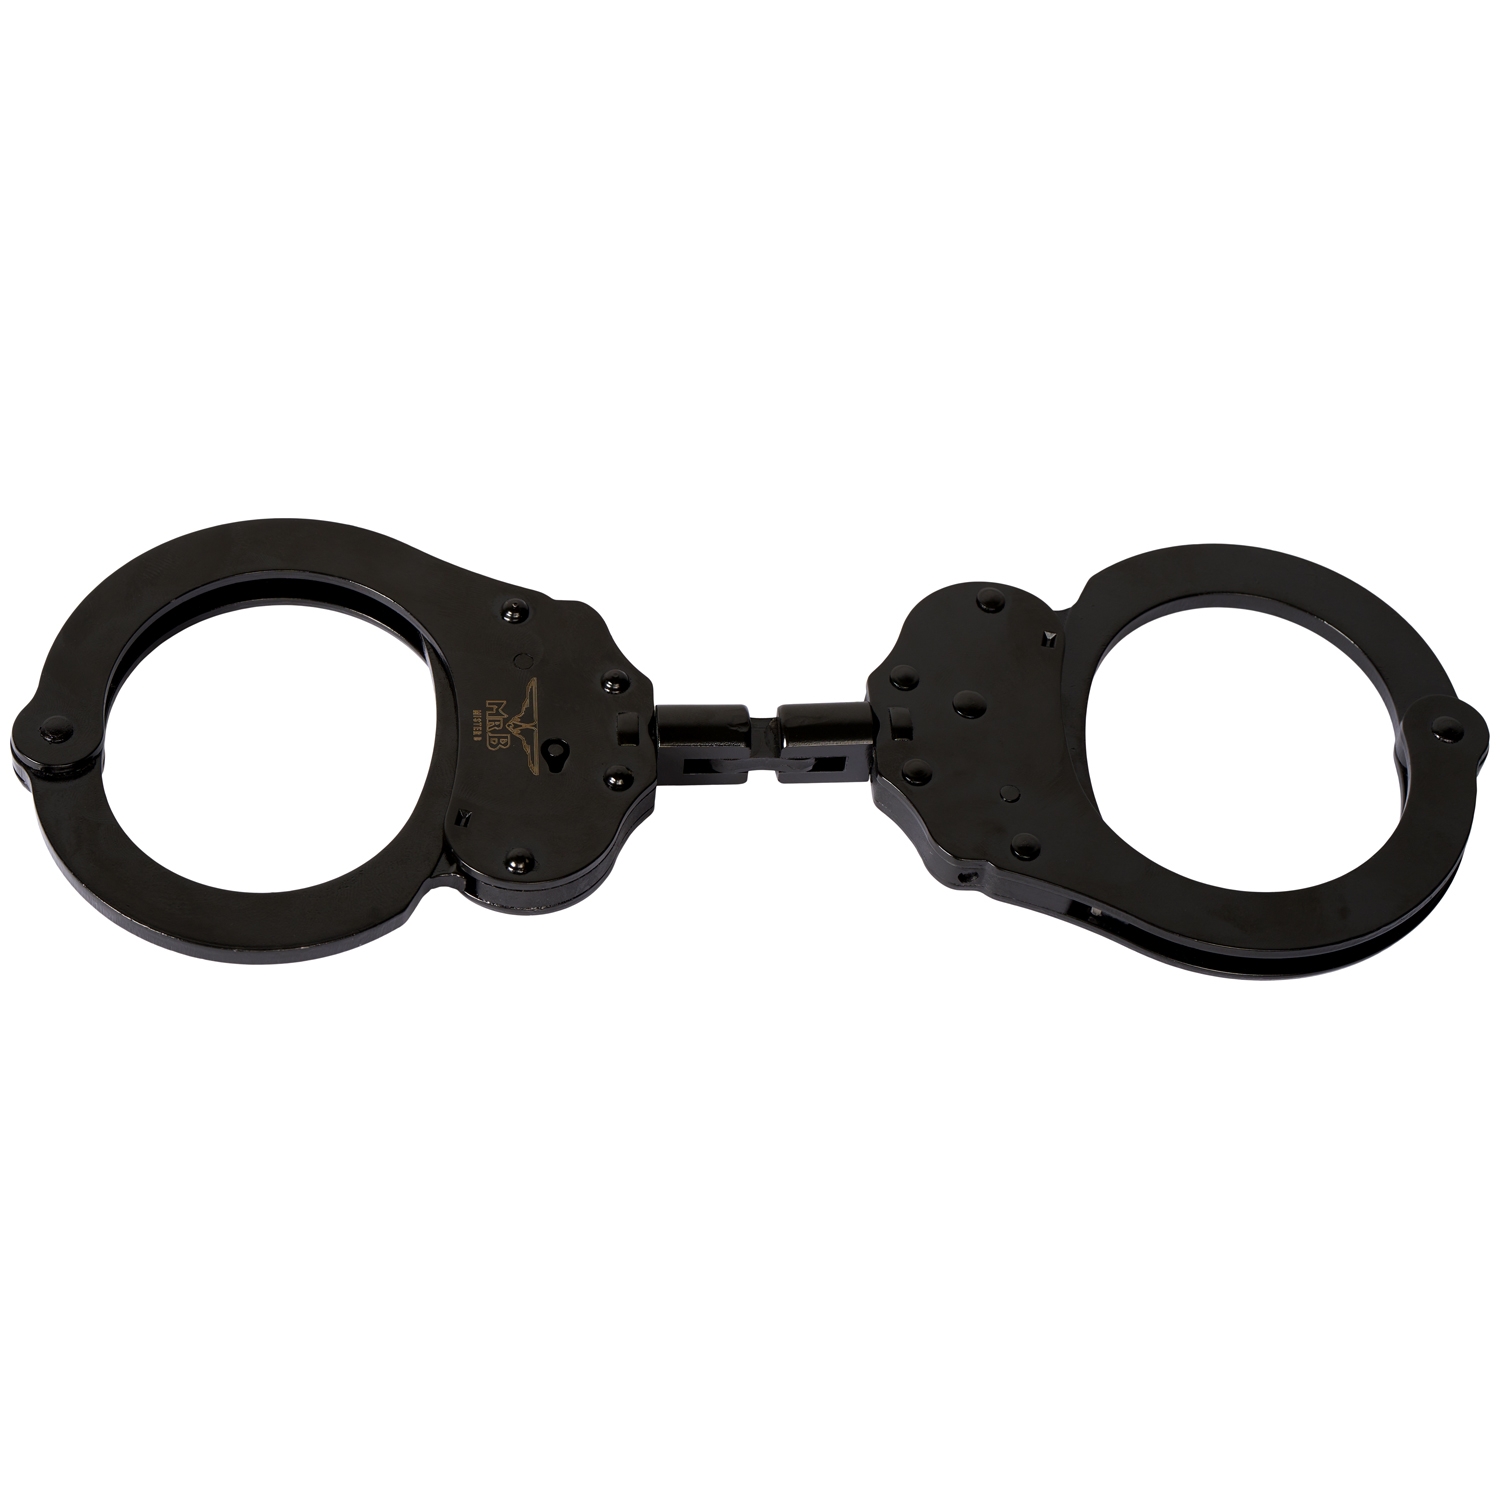 Mister B Cuff Double Lock with Hoop Black - Black thumbnail